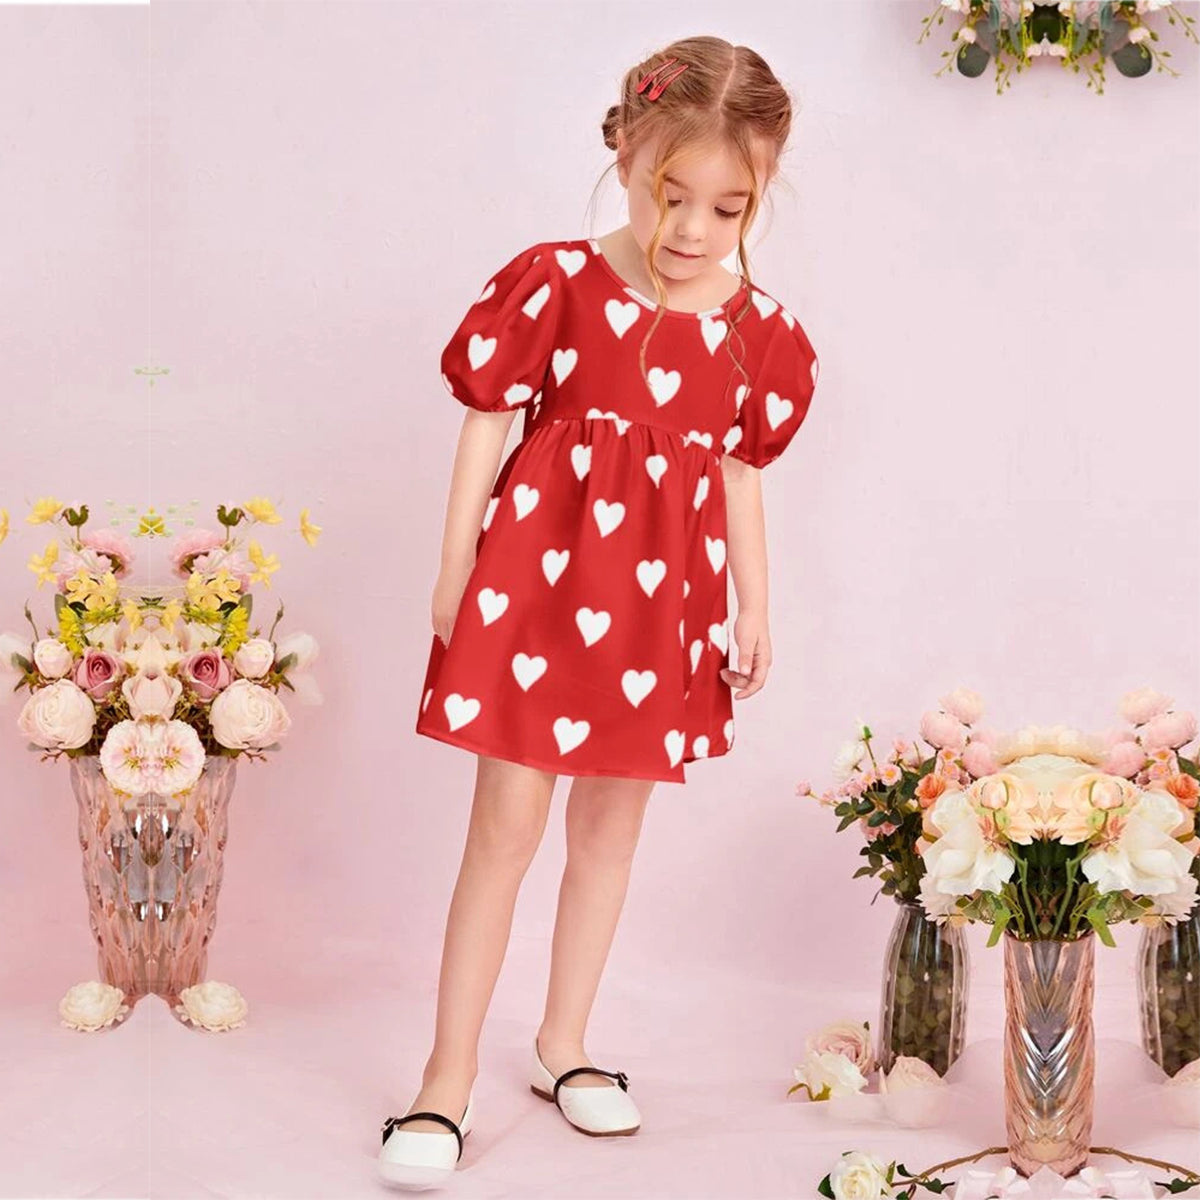 Stylish Kids New Fashion White_Red Frock & Dress for Baby Girls.